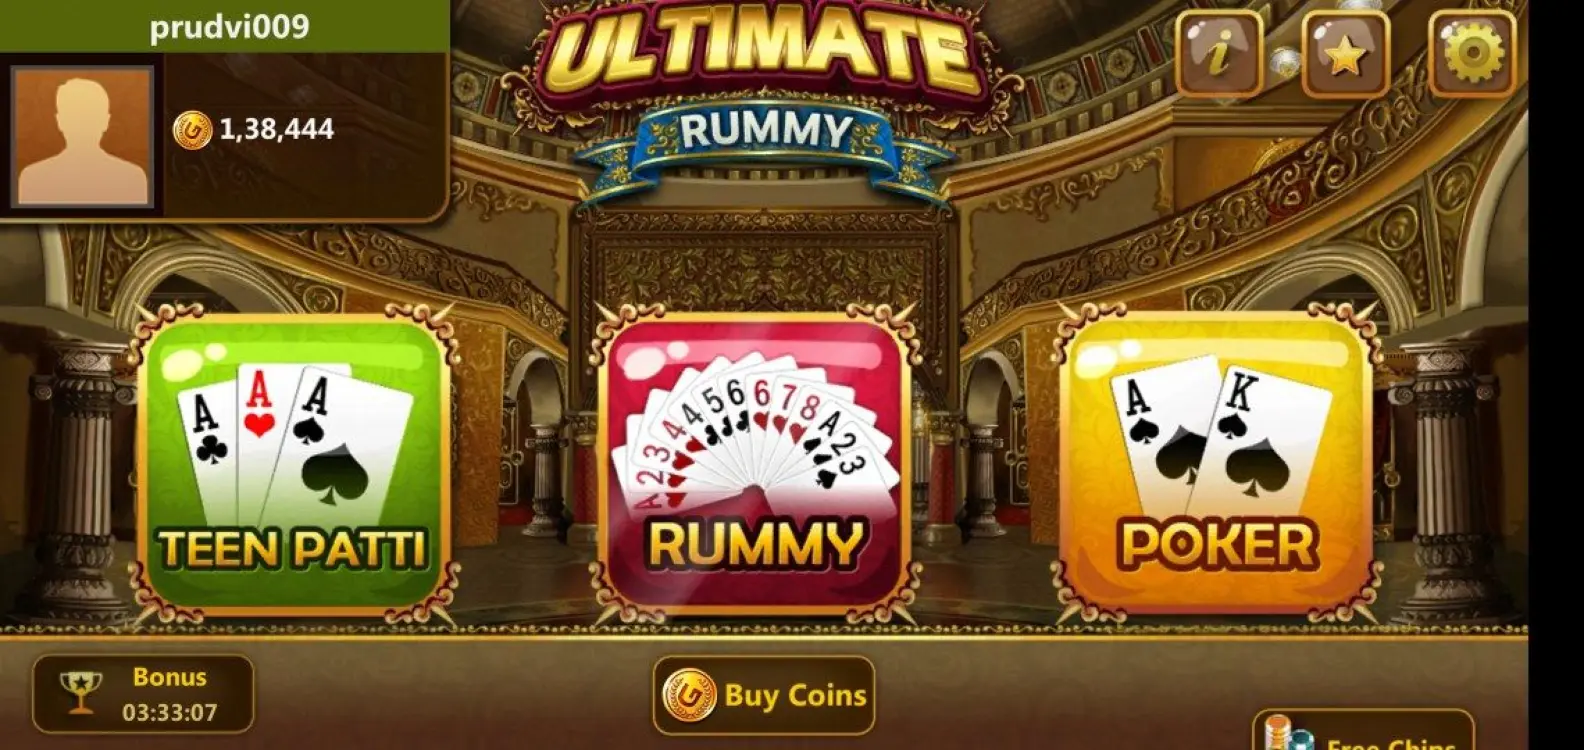 More Games Available in Ultimate rummy app